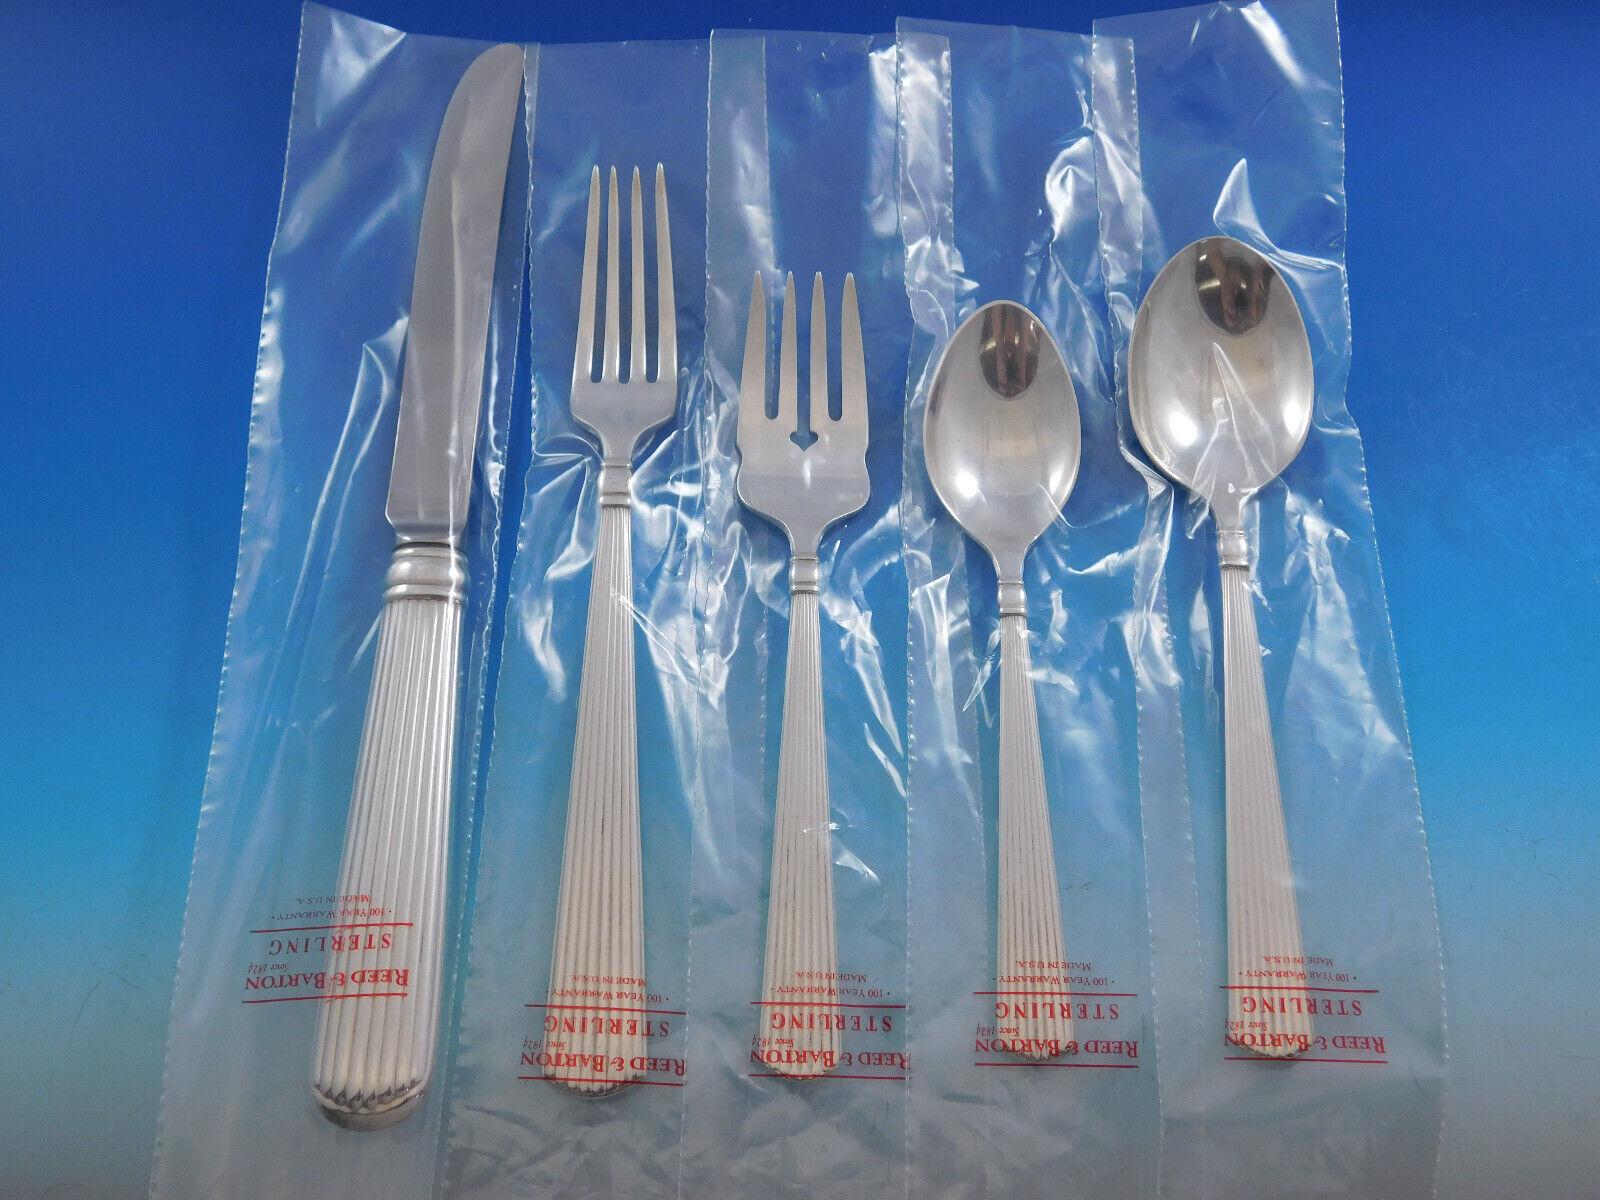 Ashmont by Reed & Barton is a sleek and heavy sterling silver flatware pattern with elegant linear fluting, providing a timeless elegance sure to enhance any tabletop.
Unused Dinner Size Ashmont by Reed & Barton sterling silver Flatware set, 66